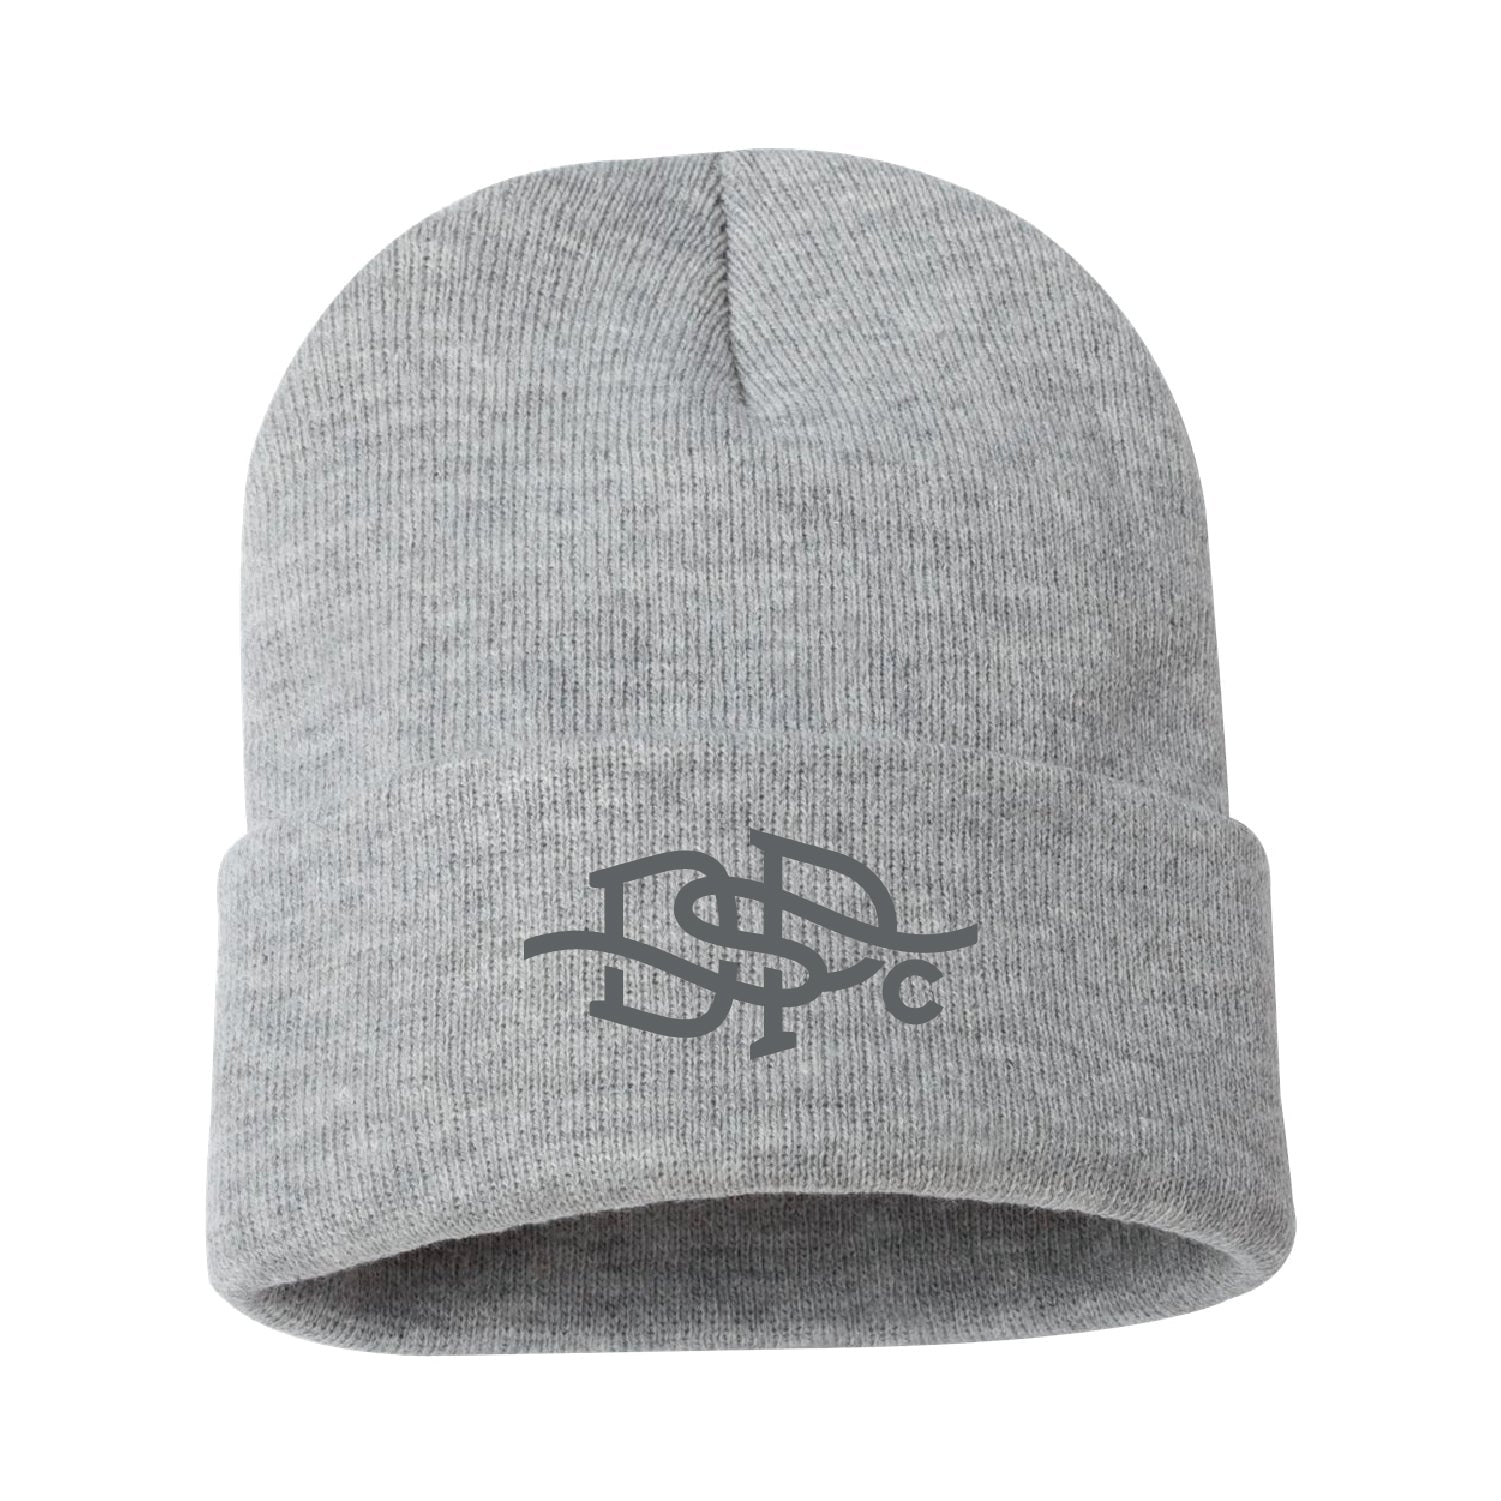 DSP Company Solid 12" Cuffed Beanie - DSP On Demand